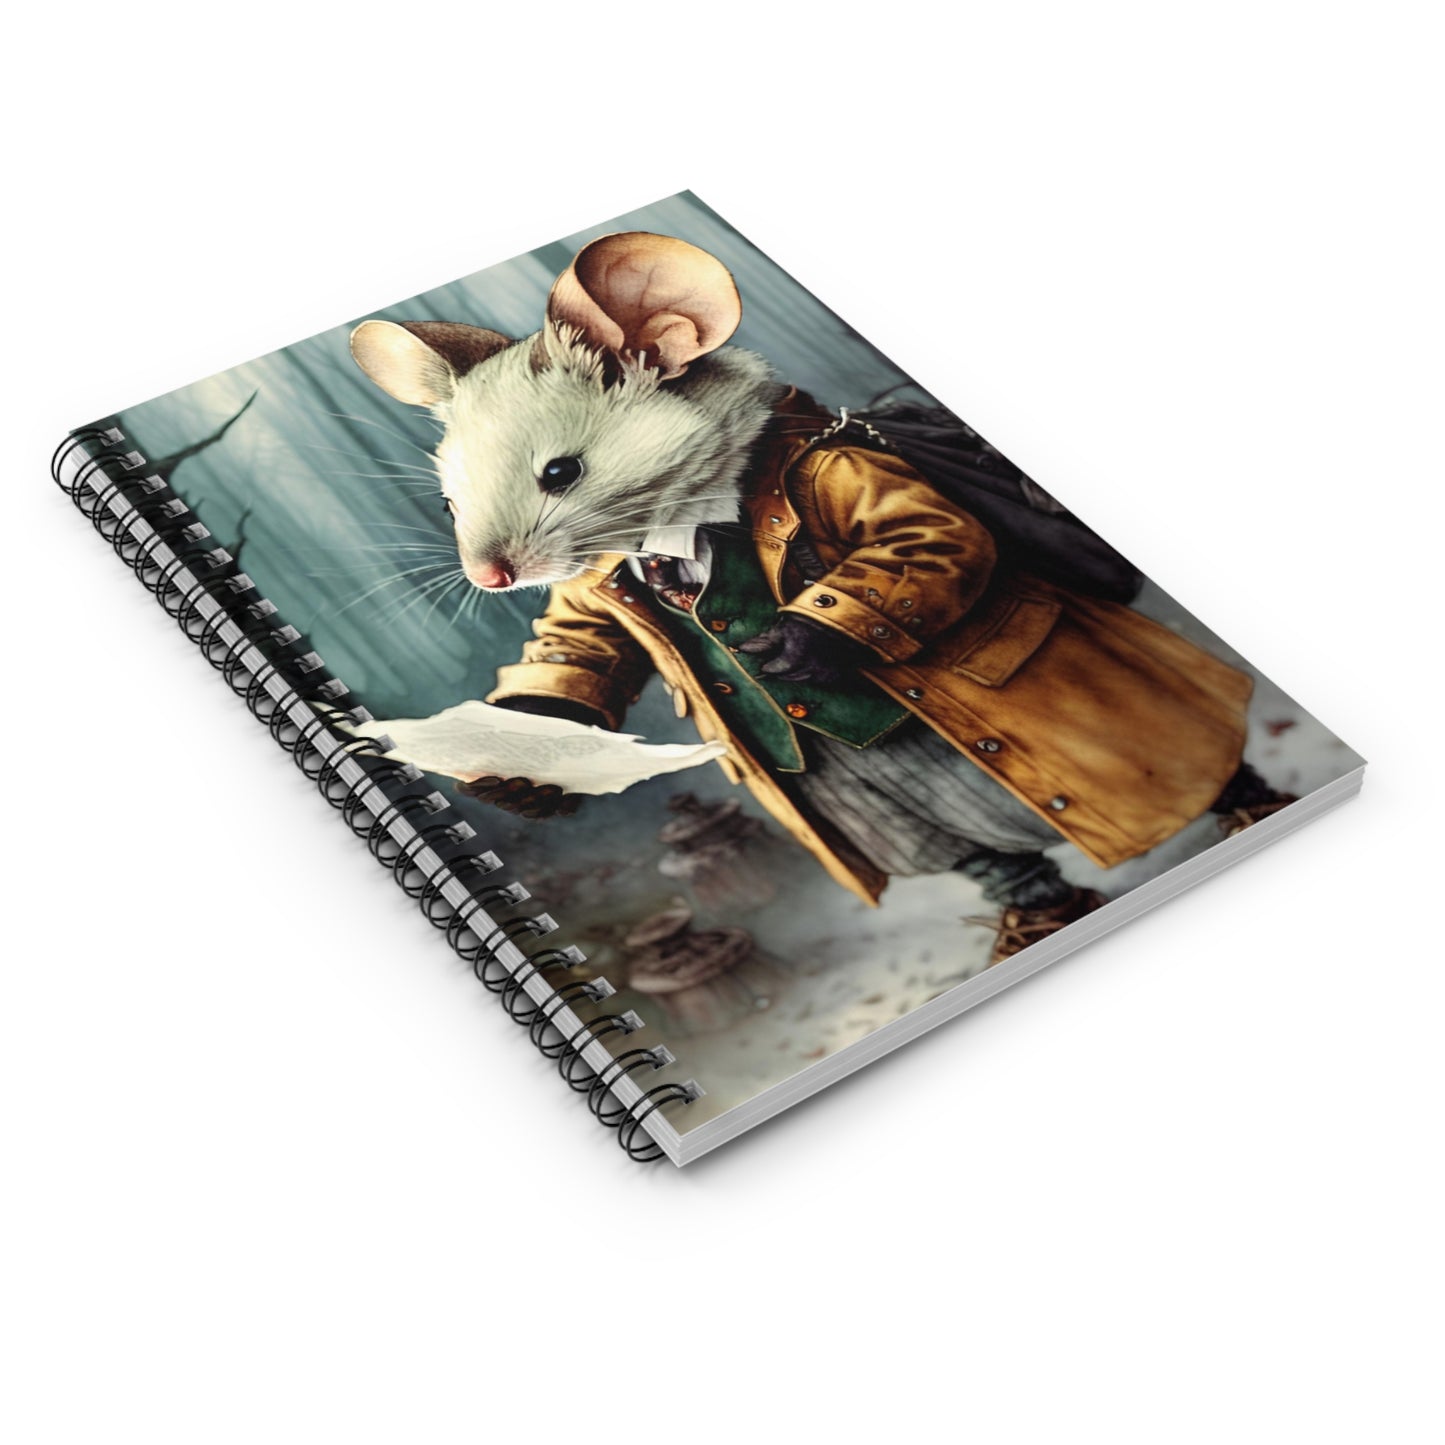 Mouse Spiral Notebook, Ruled Line